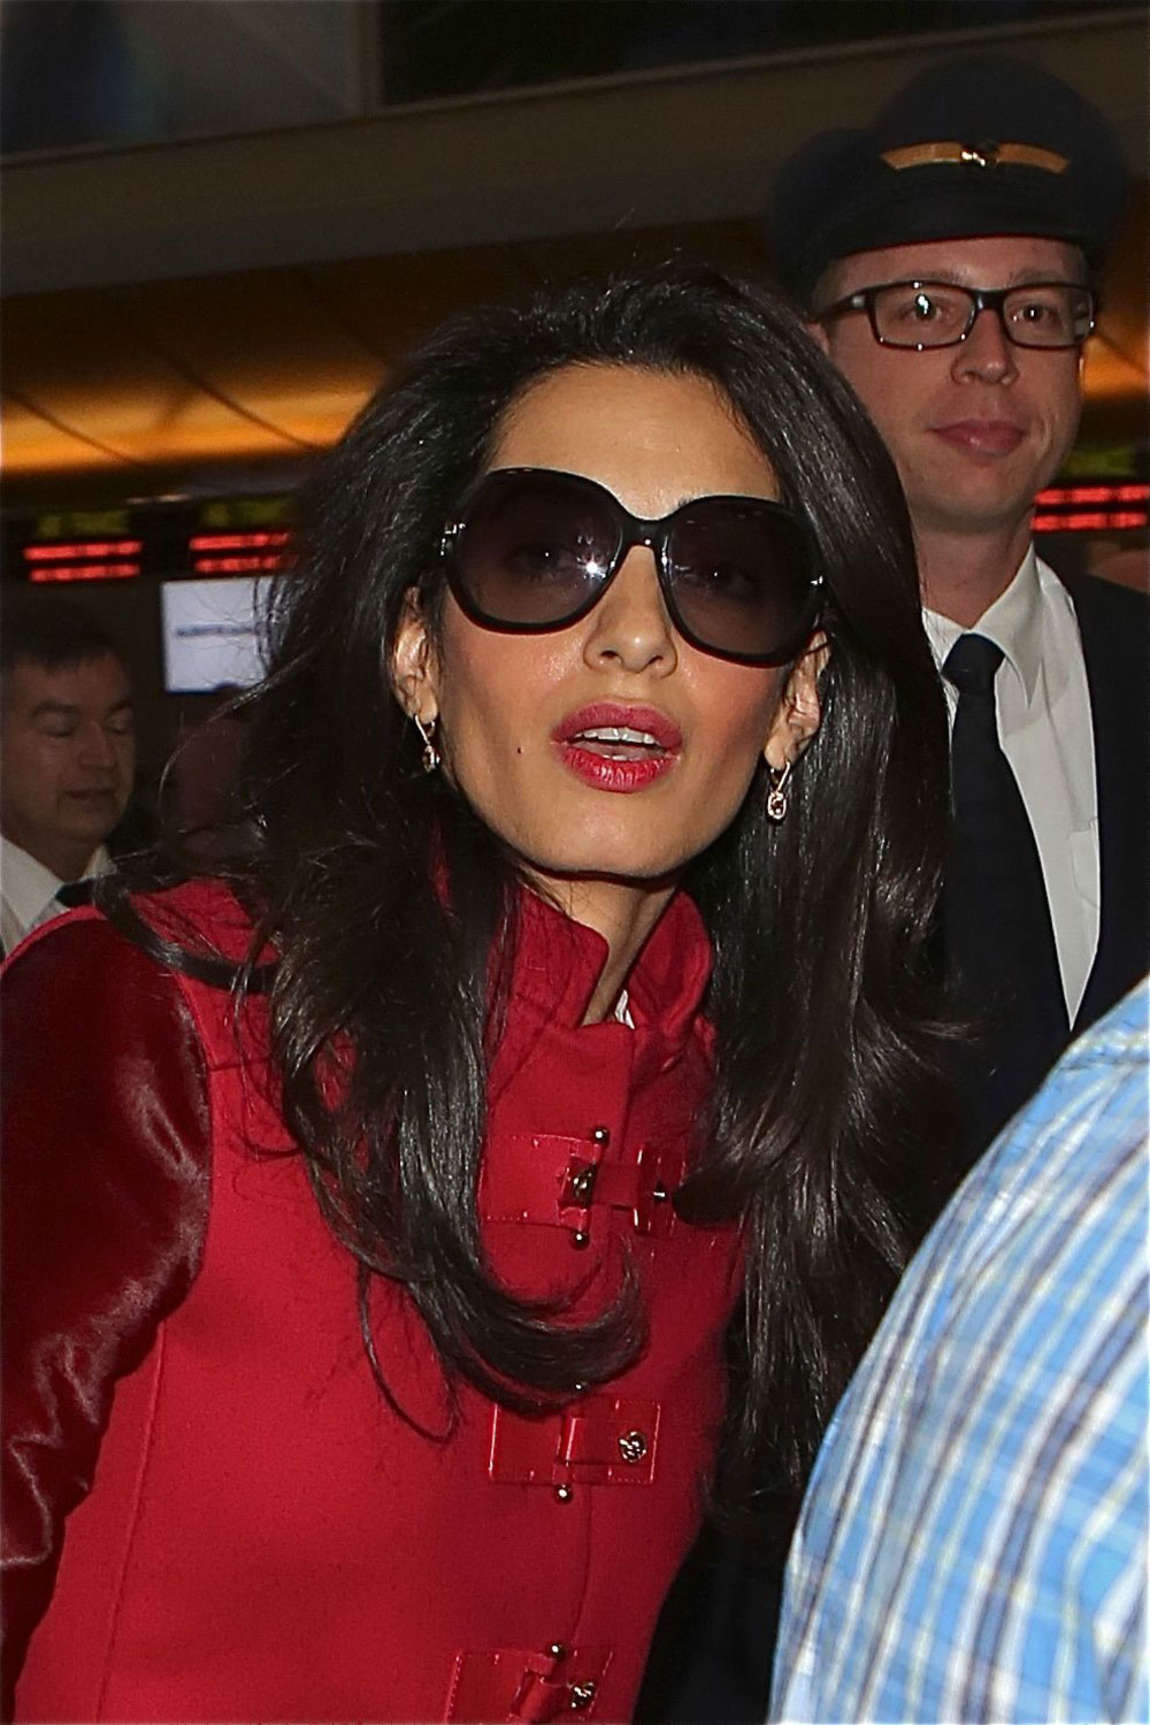 Amal Clooney at LAX Airport in Los Angeles